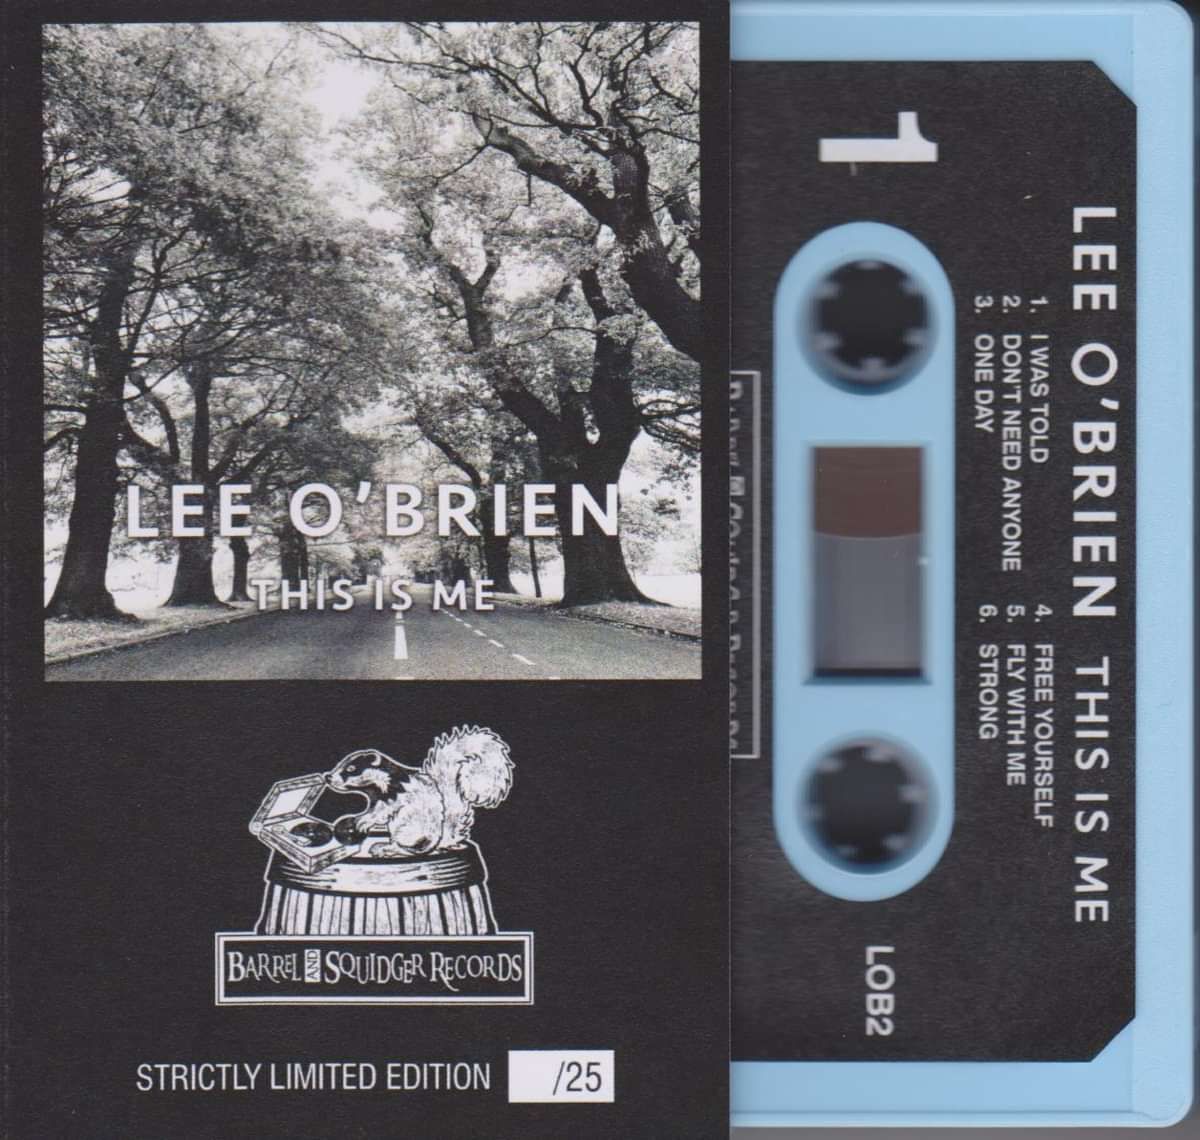 Lee O'Brien - This Is Me - Blue Cassette [Recorded with Status Quo's Francis Rossi] - Barrel And Squidger Records